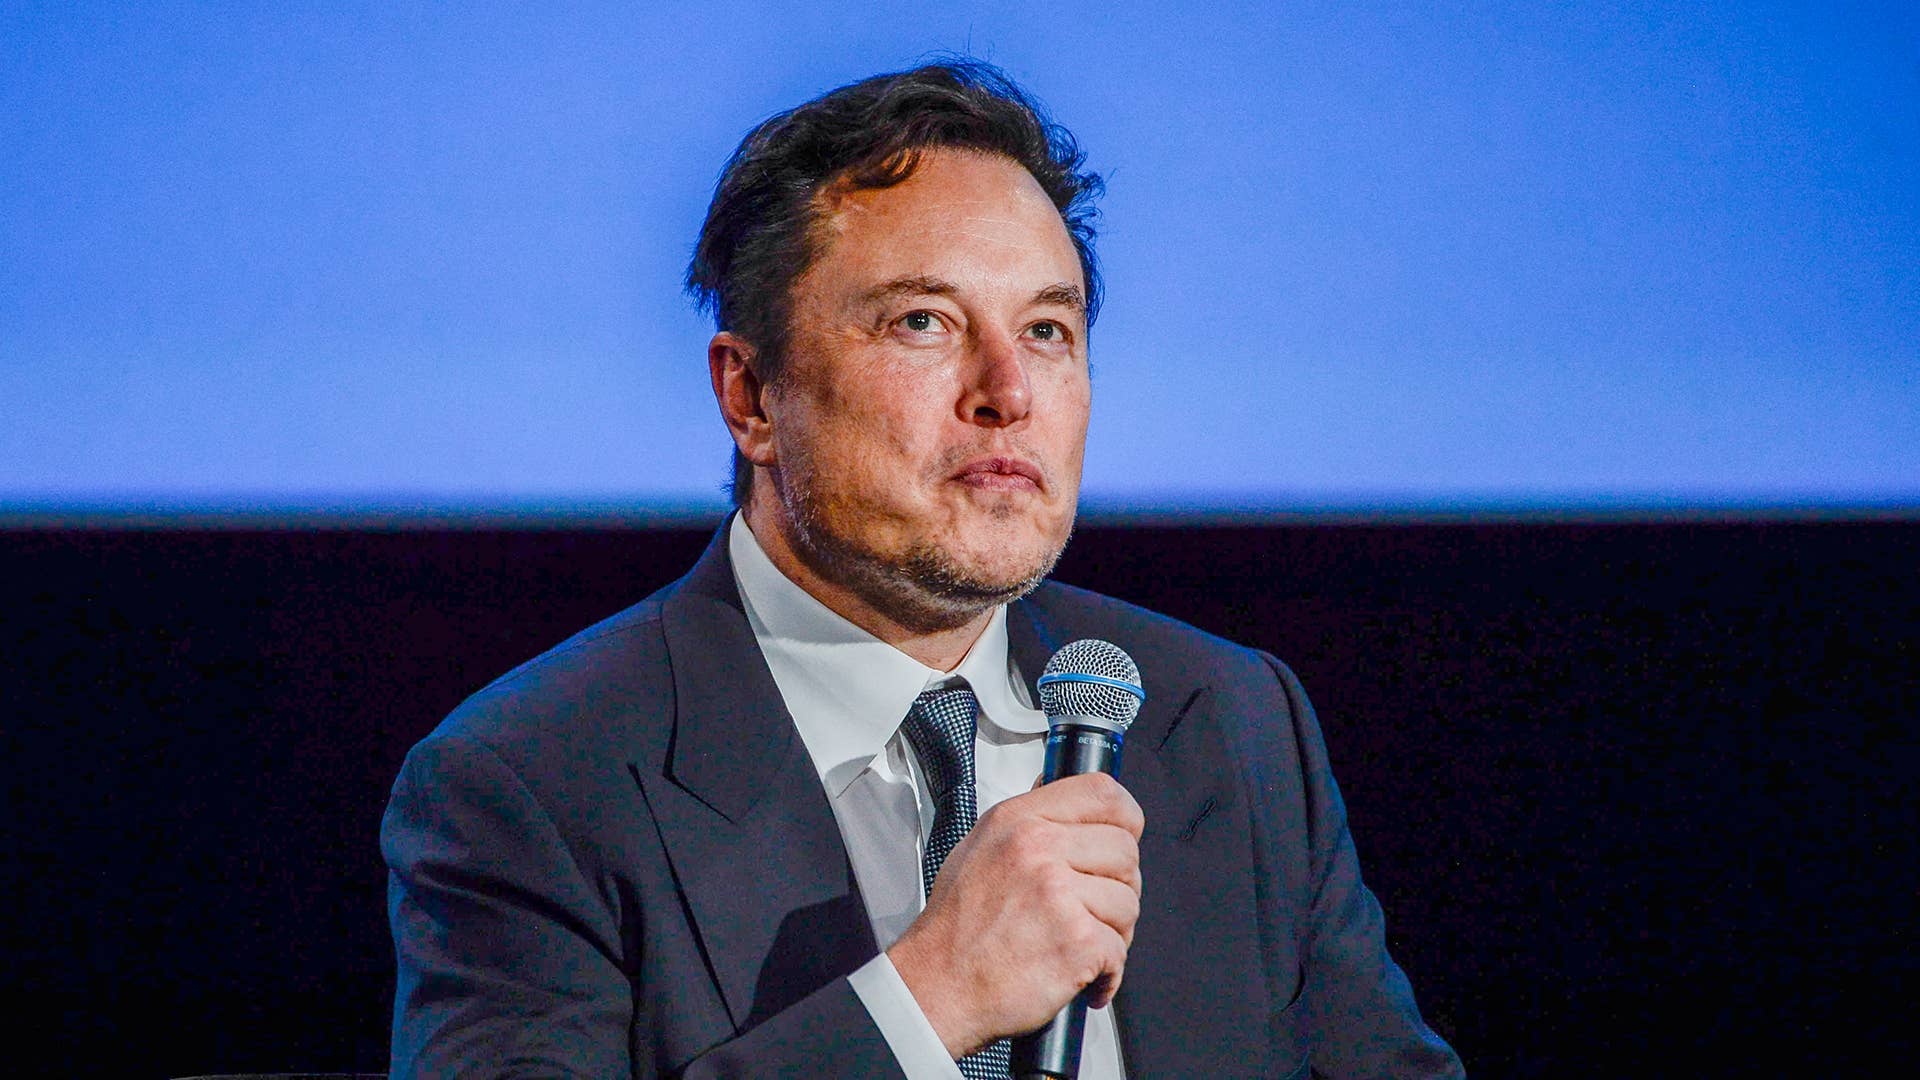 Tesla CEO Elon Musk looks up as he addresses guests at the Offshore Northern Seas 2022